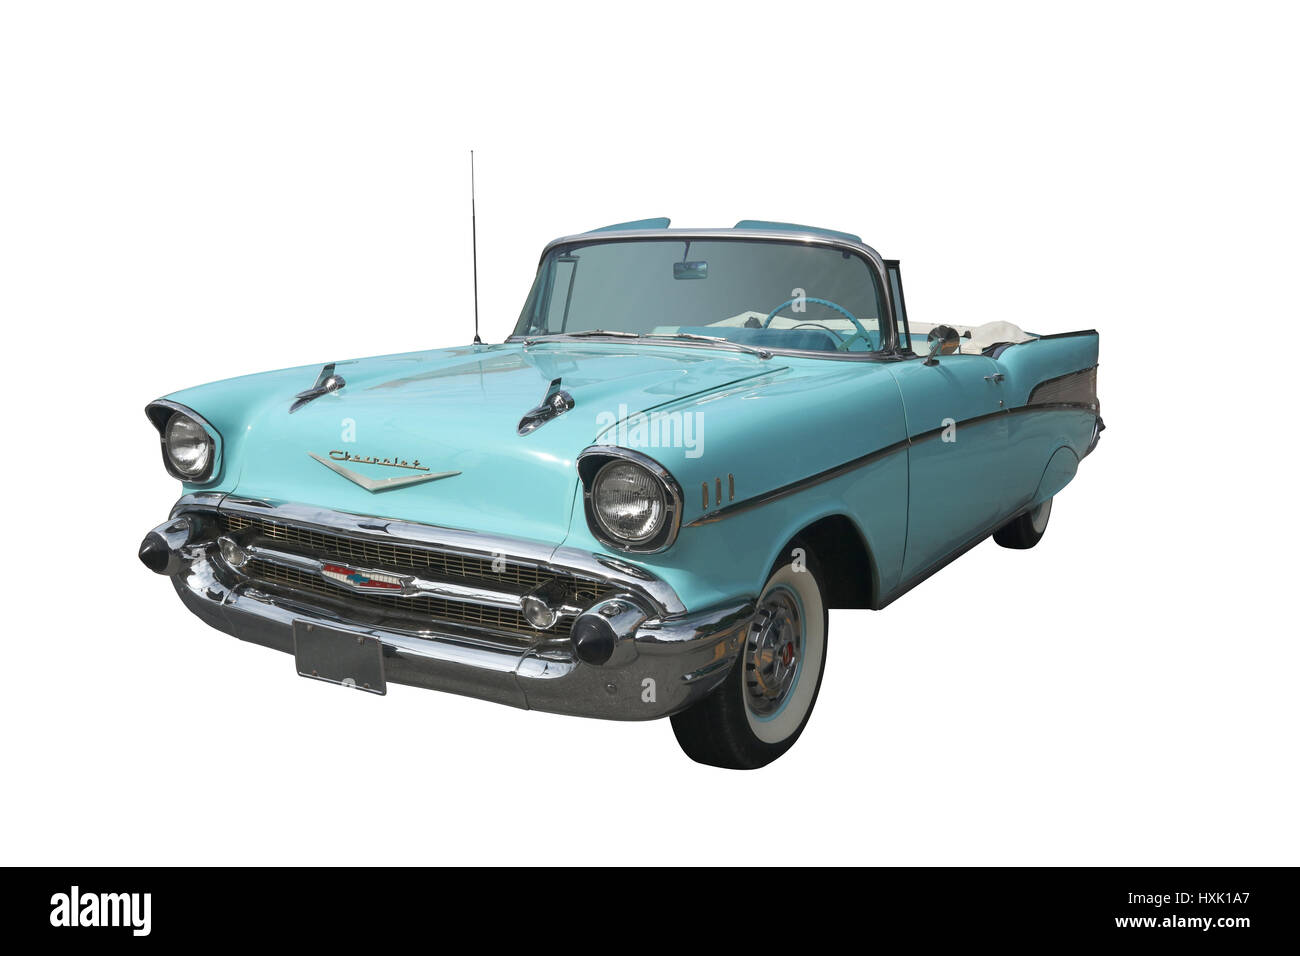 Ref. # 31524 1957 Chevrolet Bel Air Convertible Coupe Factory Photo 